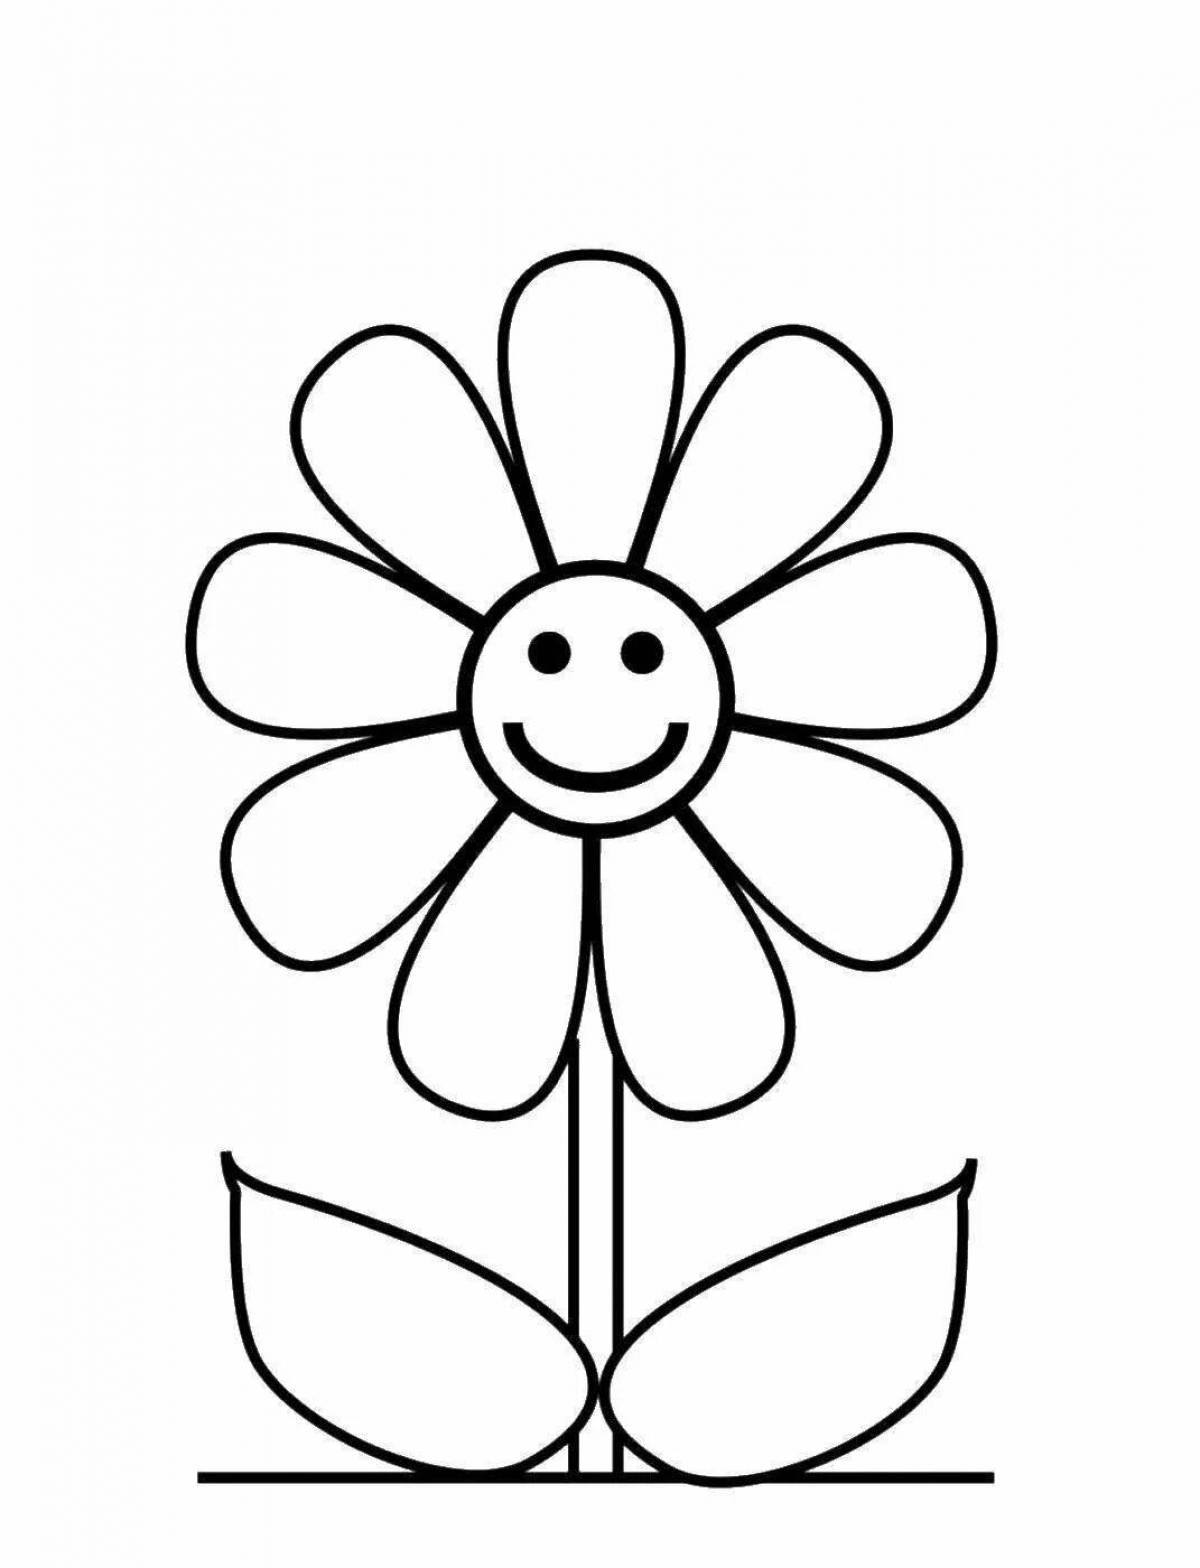 Fun chamomile flower coloring for kids